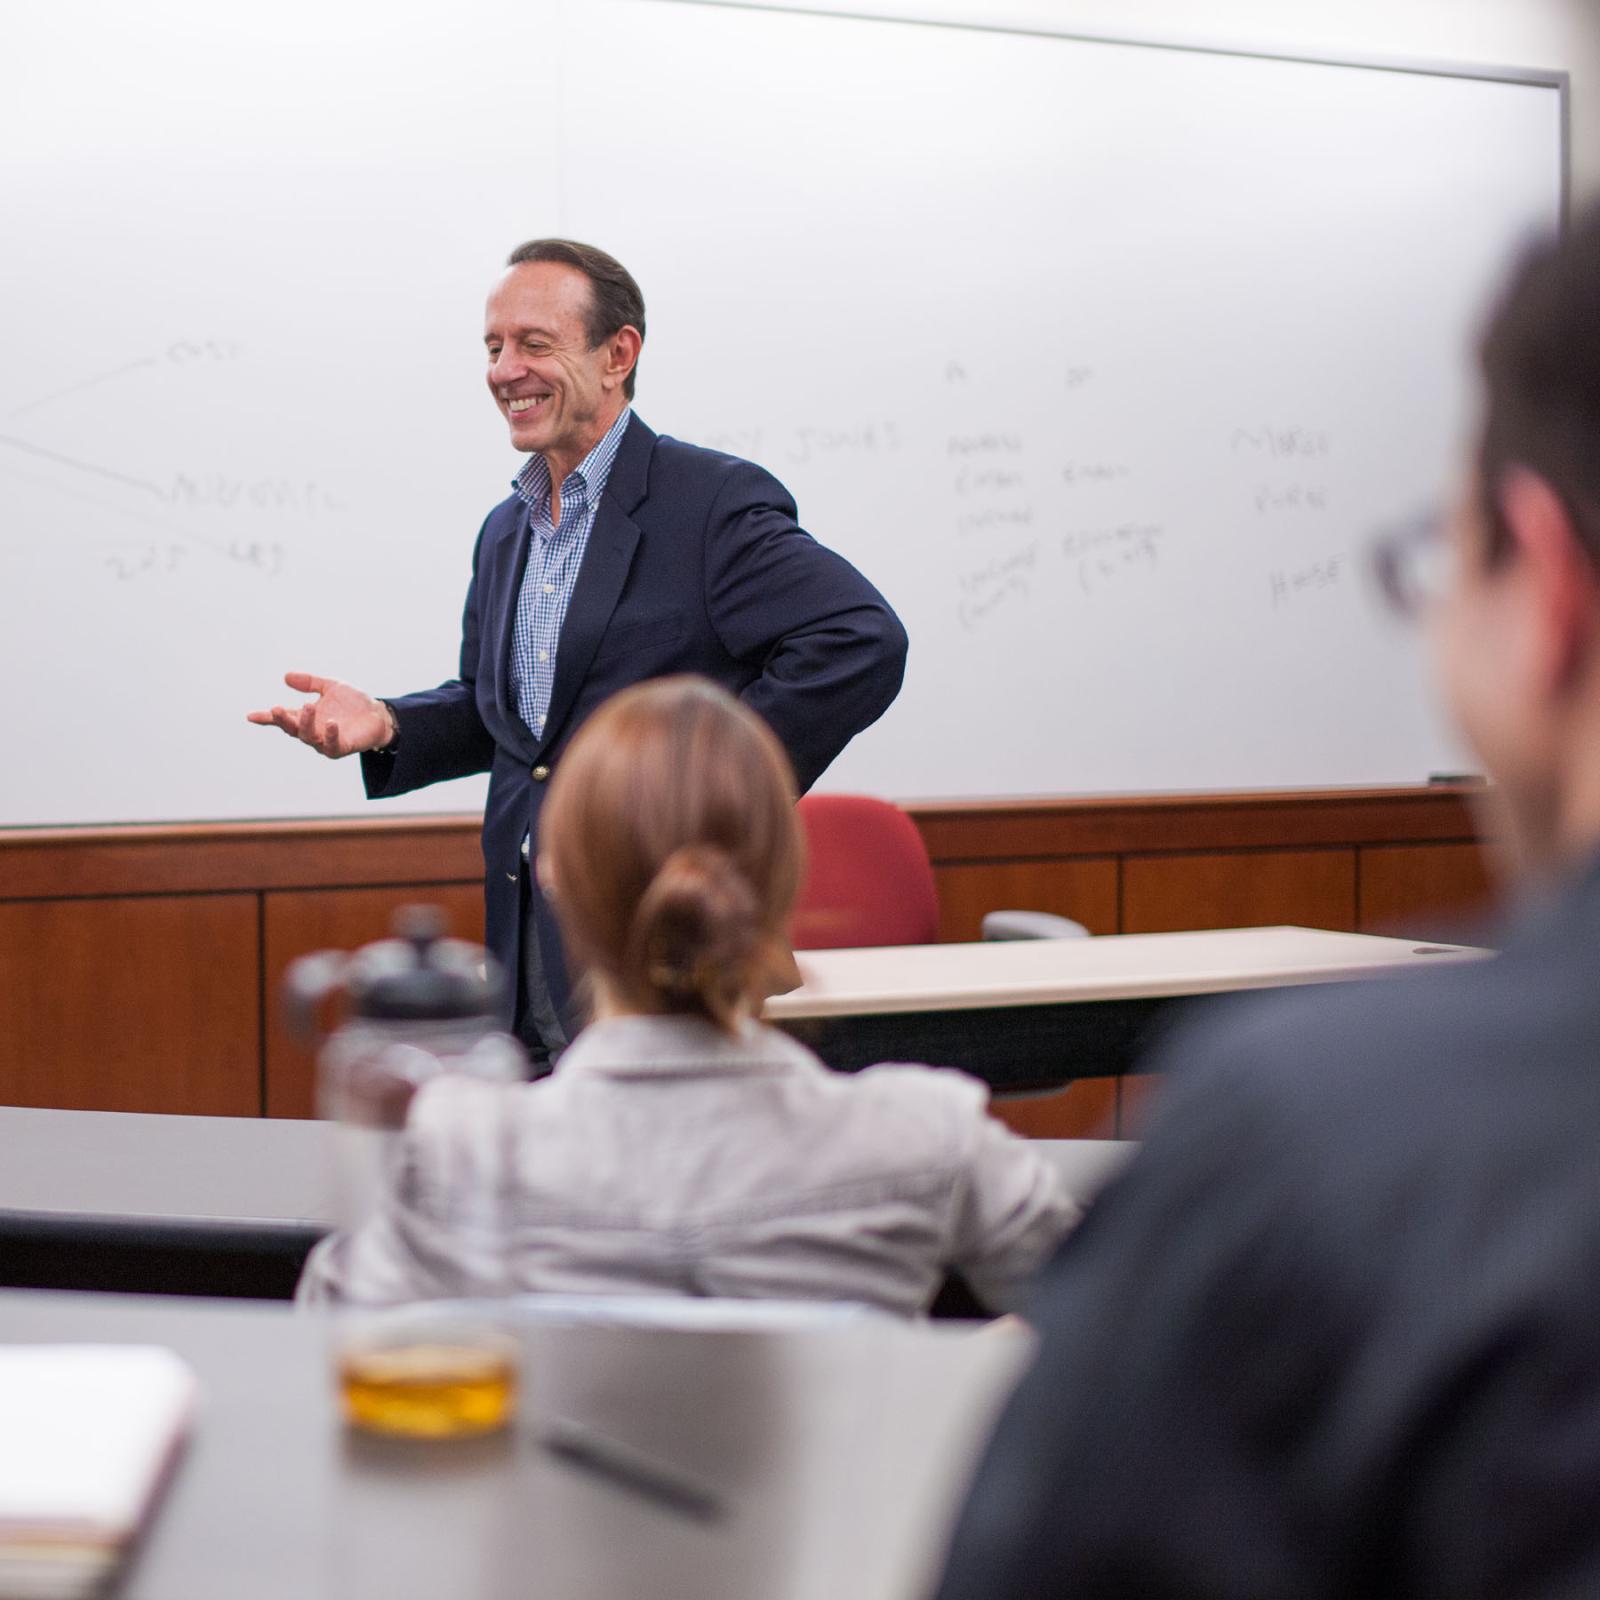 Lubin marketing professor Larry Chiagouris teaching in a classroom at One Pace Plaza, New York City Campus